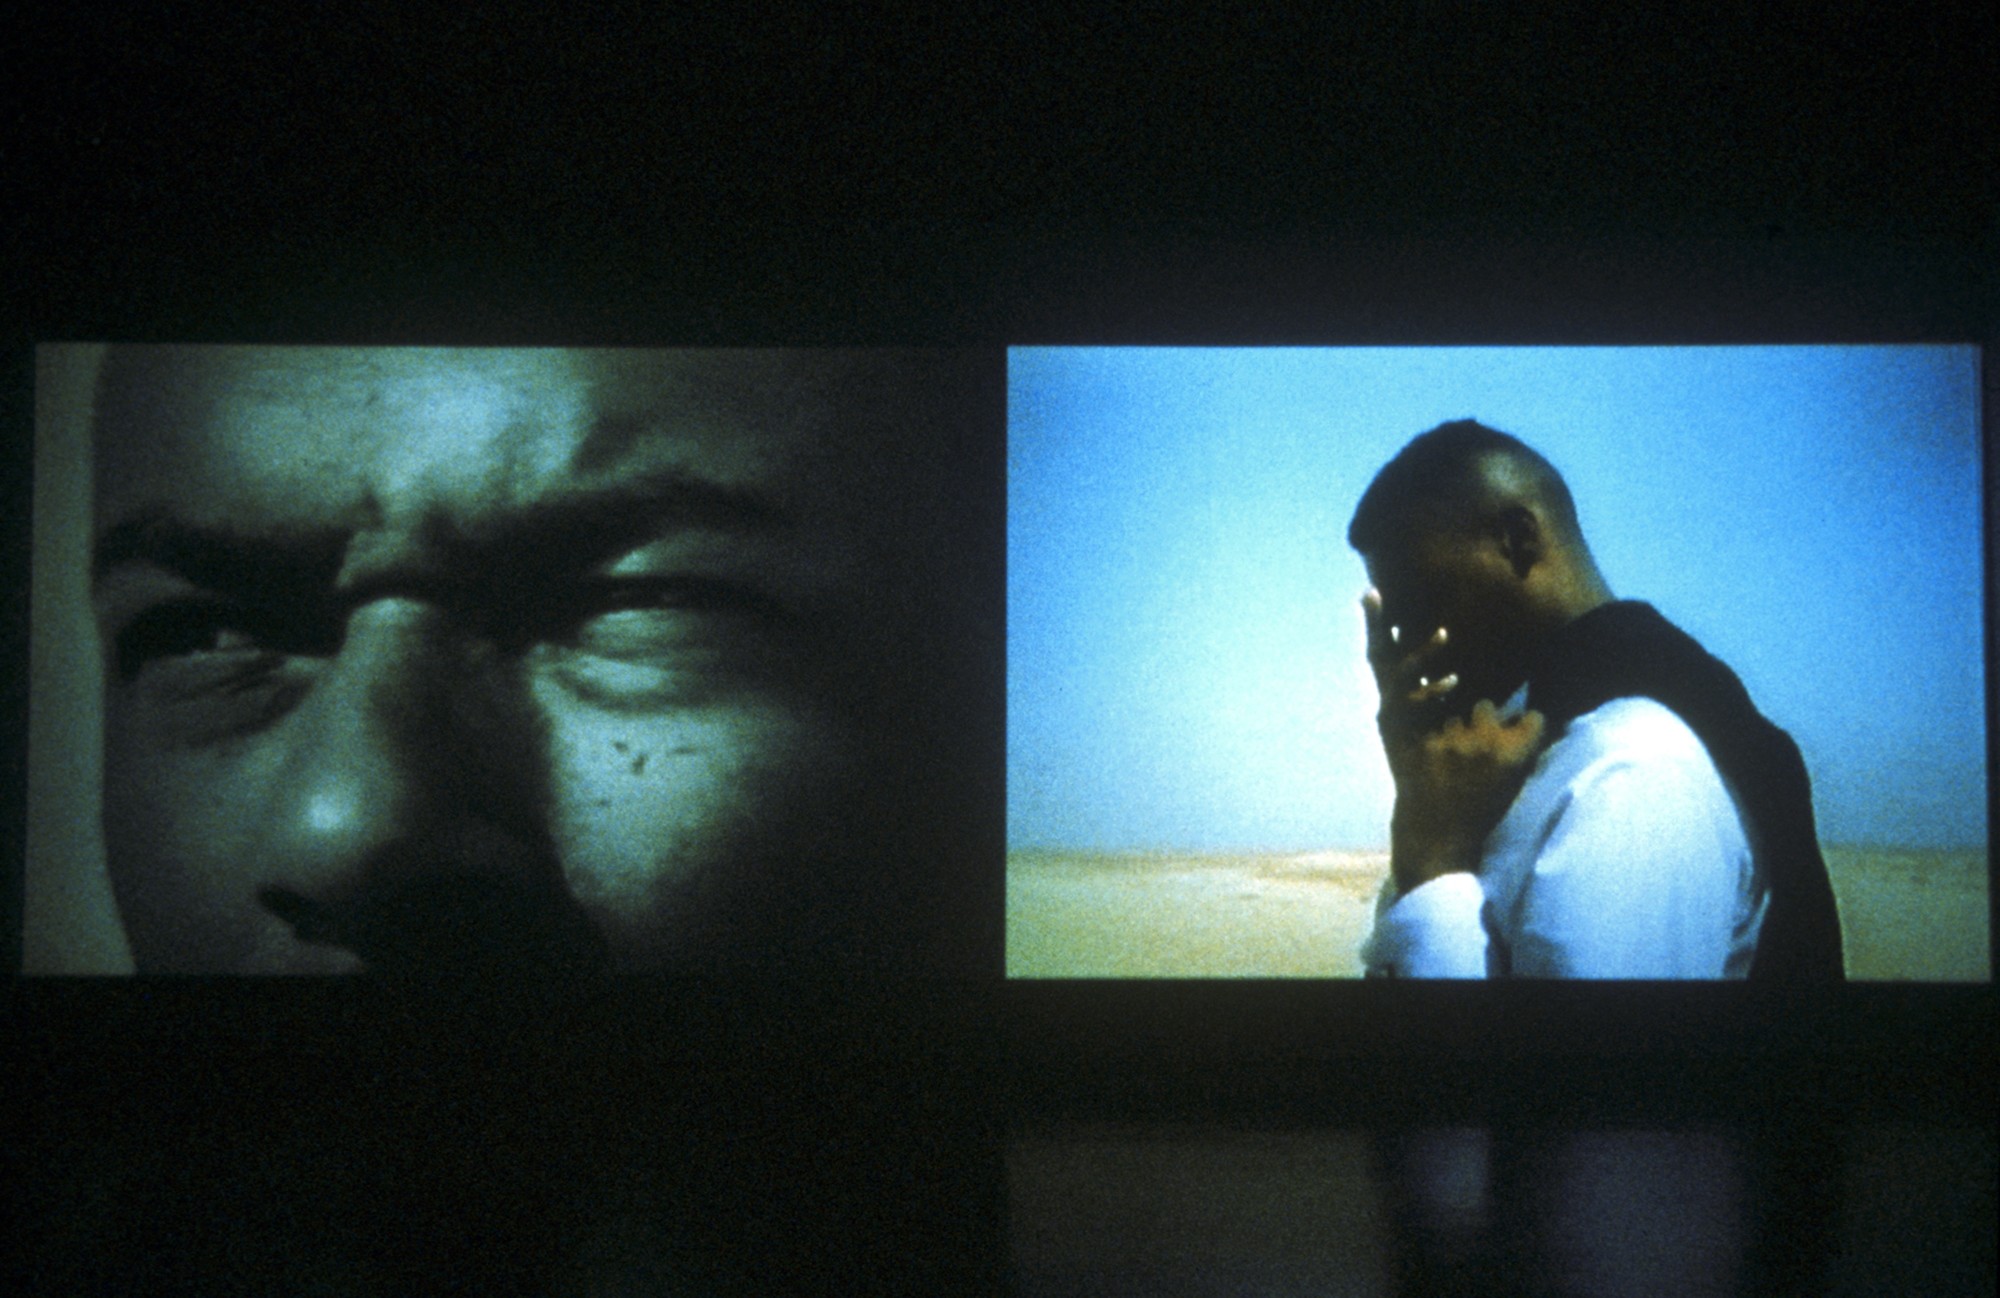 Oxford Brookes University Museum, 1999  4'53'', two-screen installation, 35mm film transferred to digital, sound